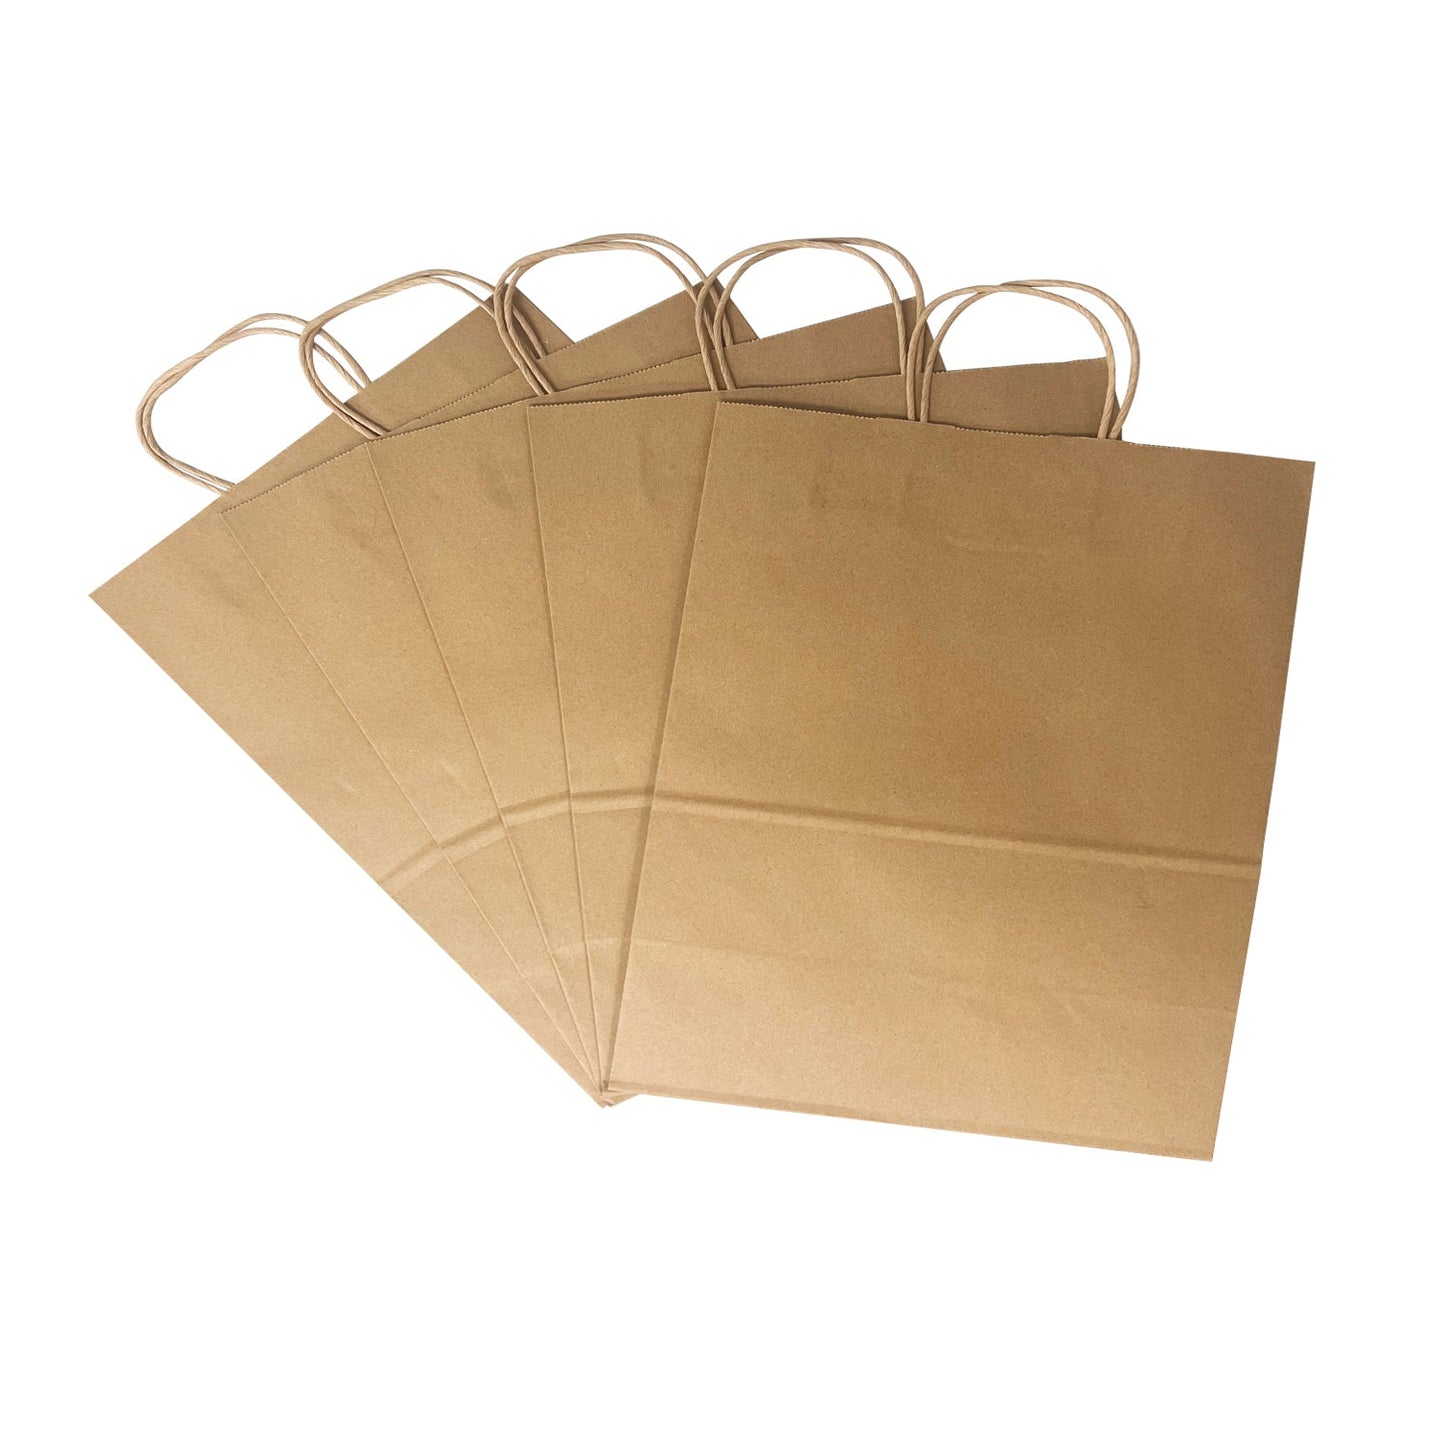 200pcs Bento 11x8x12 inches Kraft Paper Bag Cardboard Insert with Twisted Handles, $0.39/pc